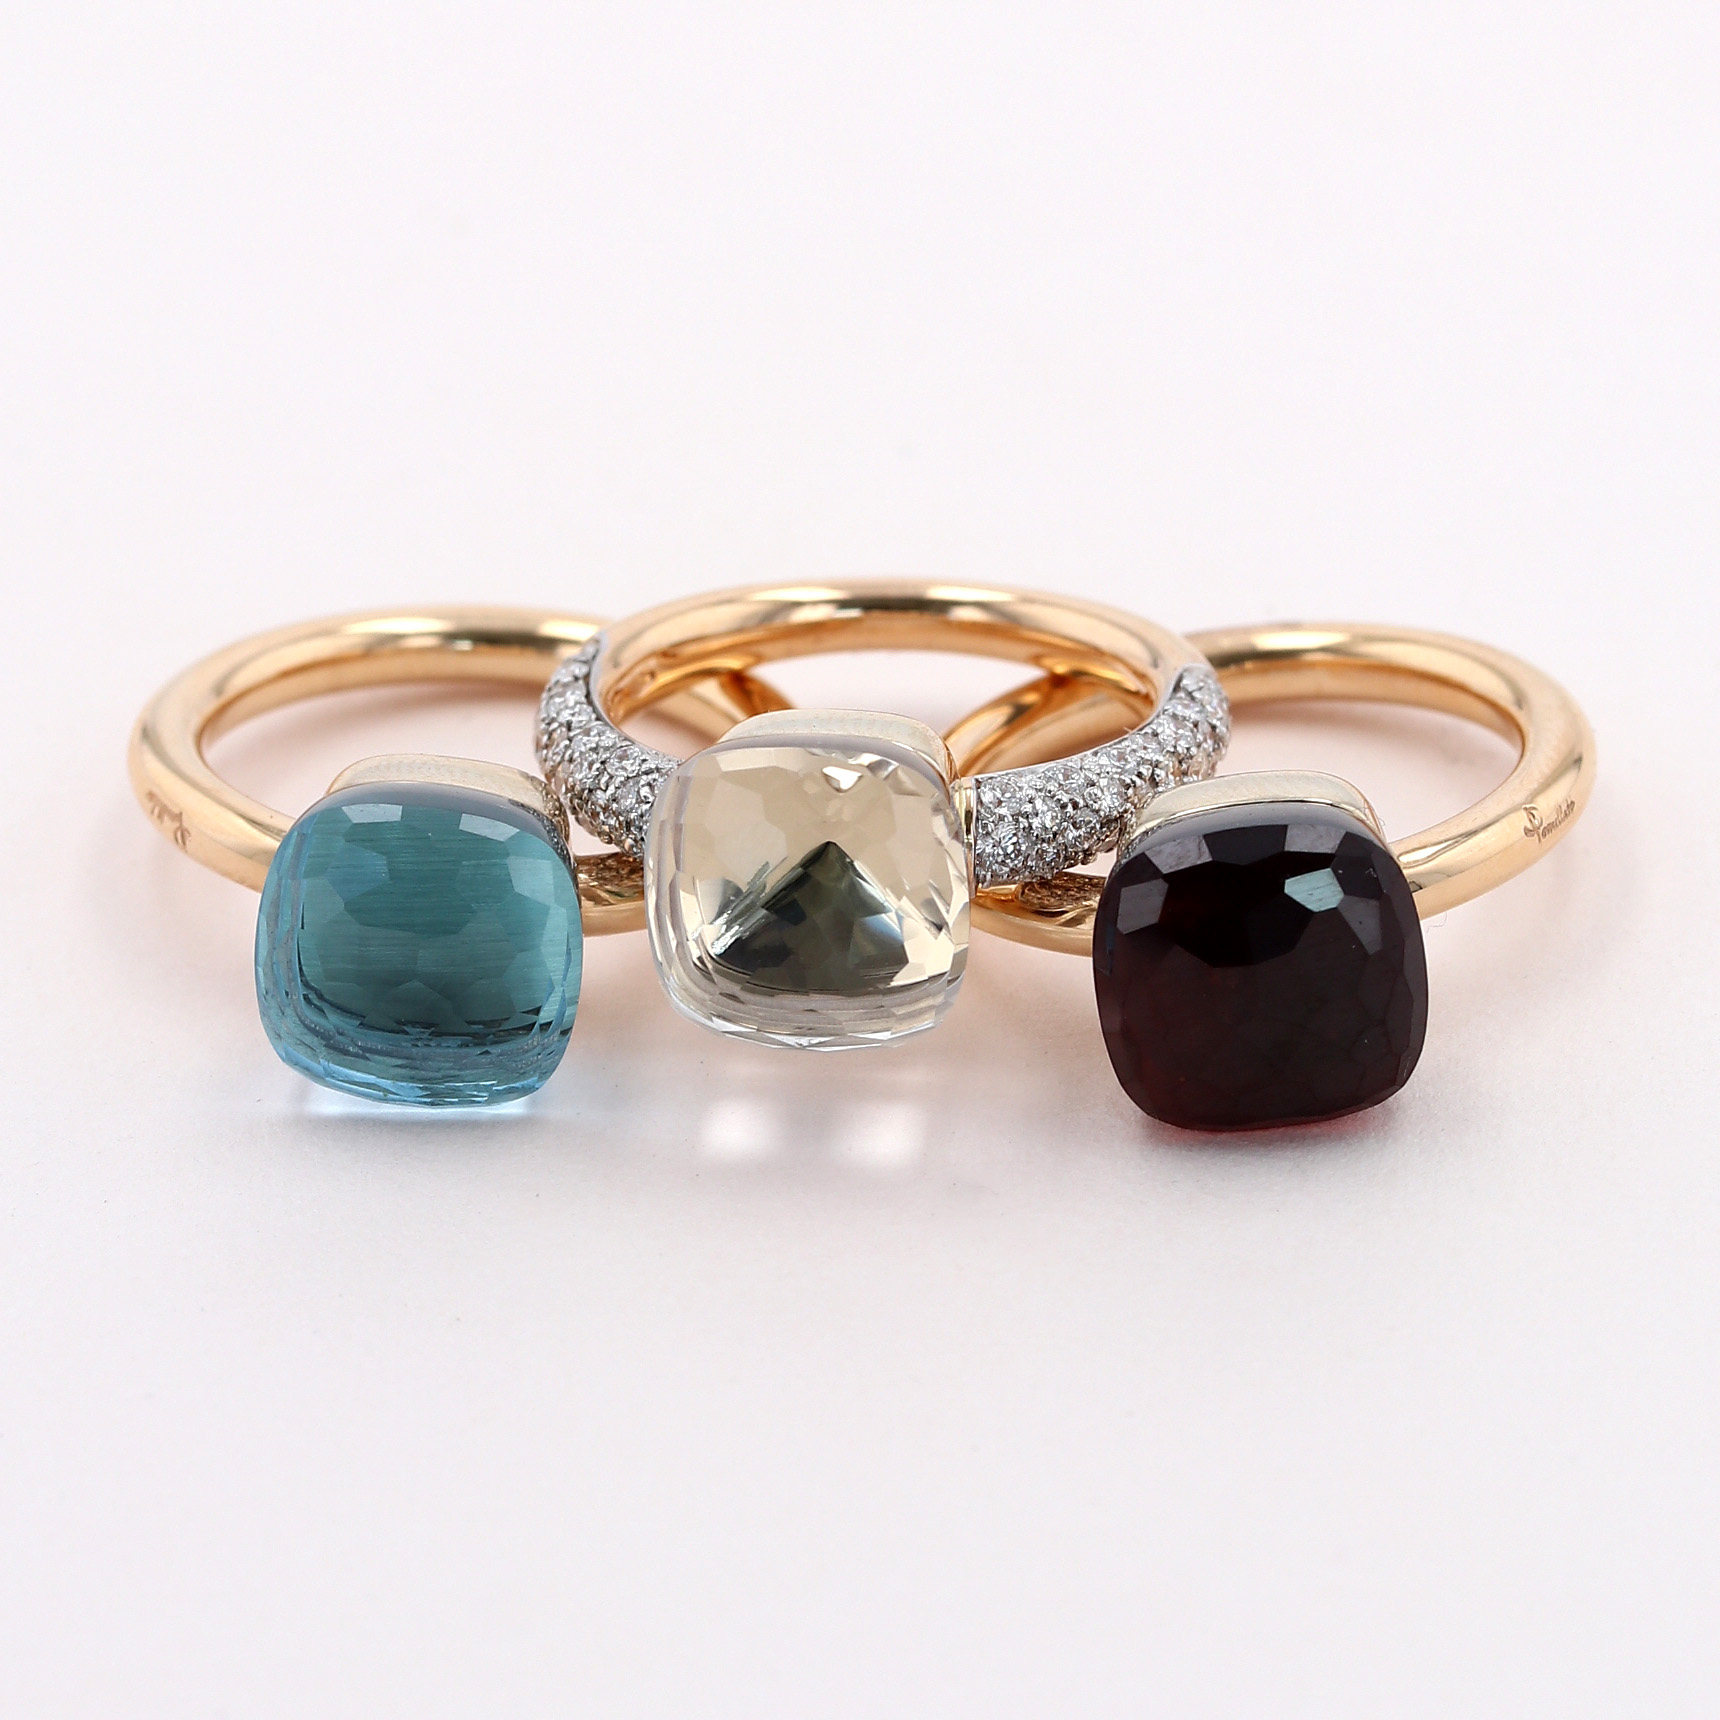 Mother's Day Gifts for Mom Rings Jewellery at La Mine d'Or Jewellers